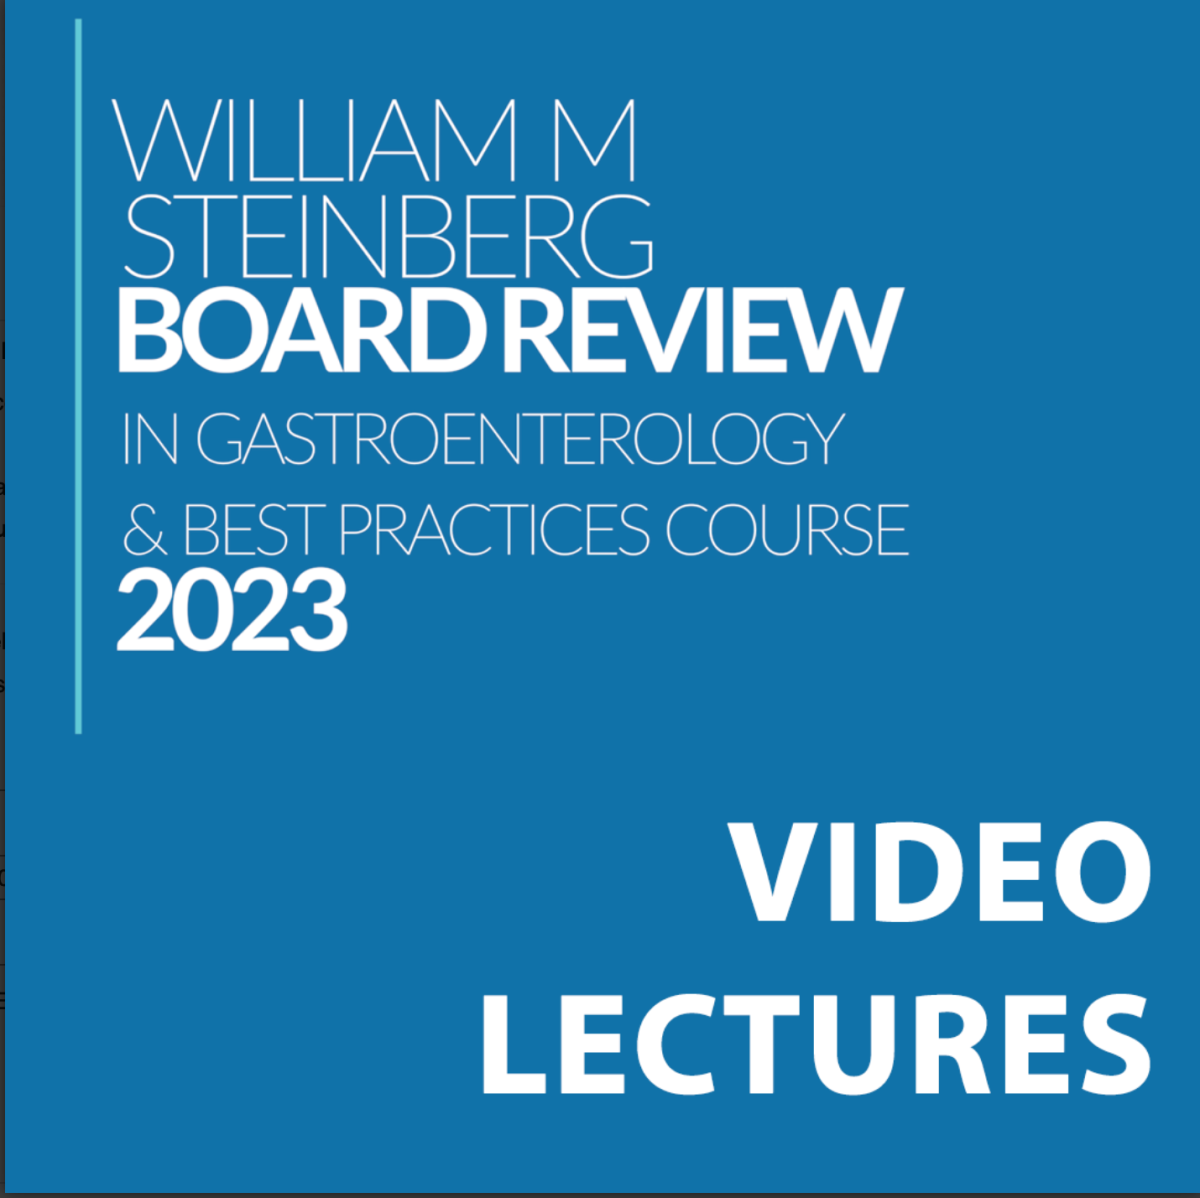 The William M. Steinberg Board Review in Gastroenterology & Best Practices Course 2023